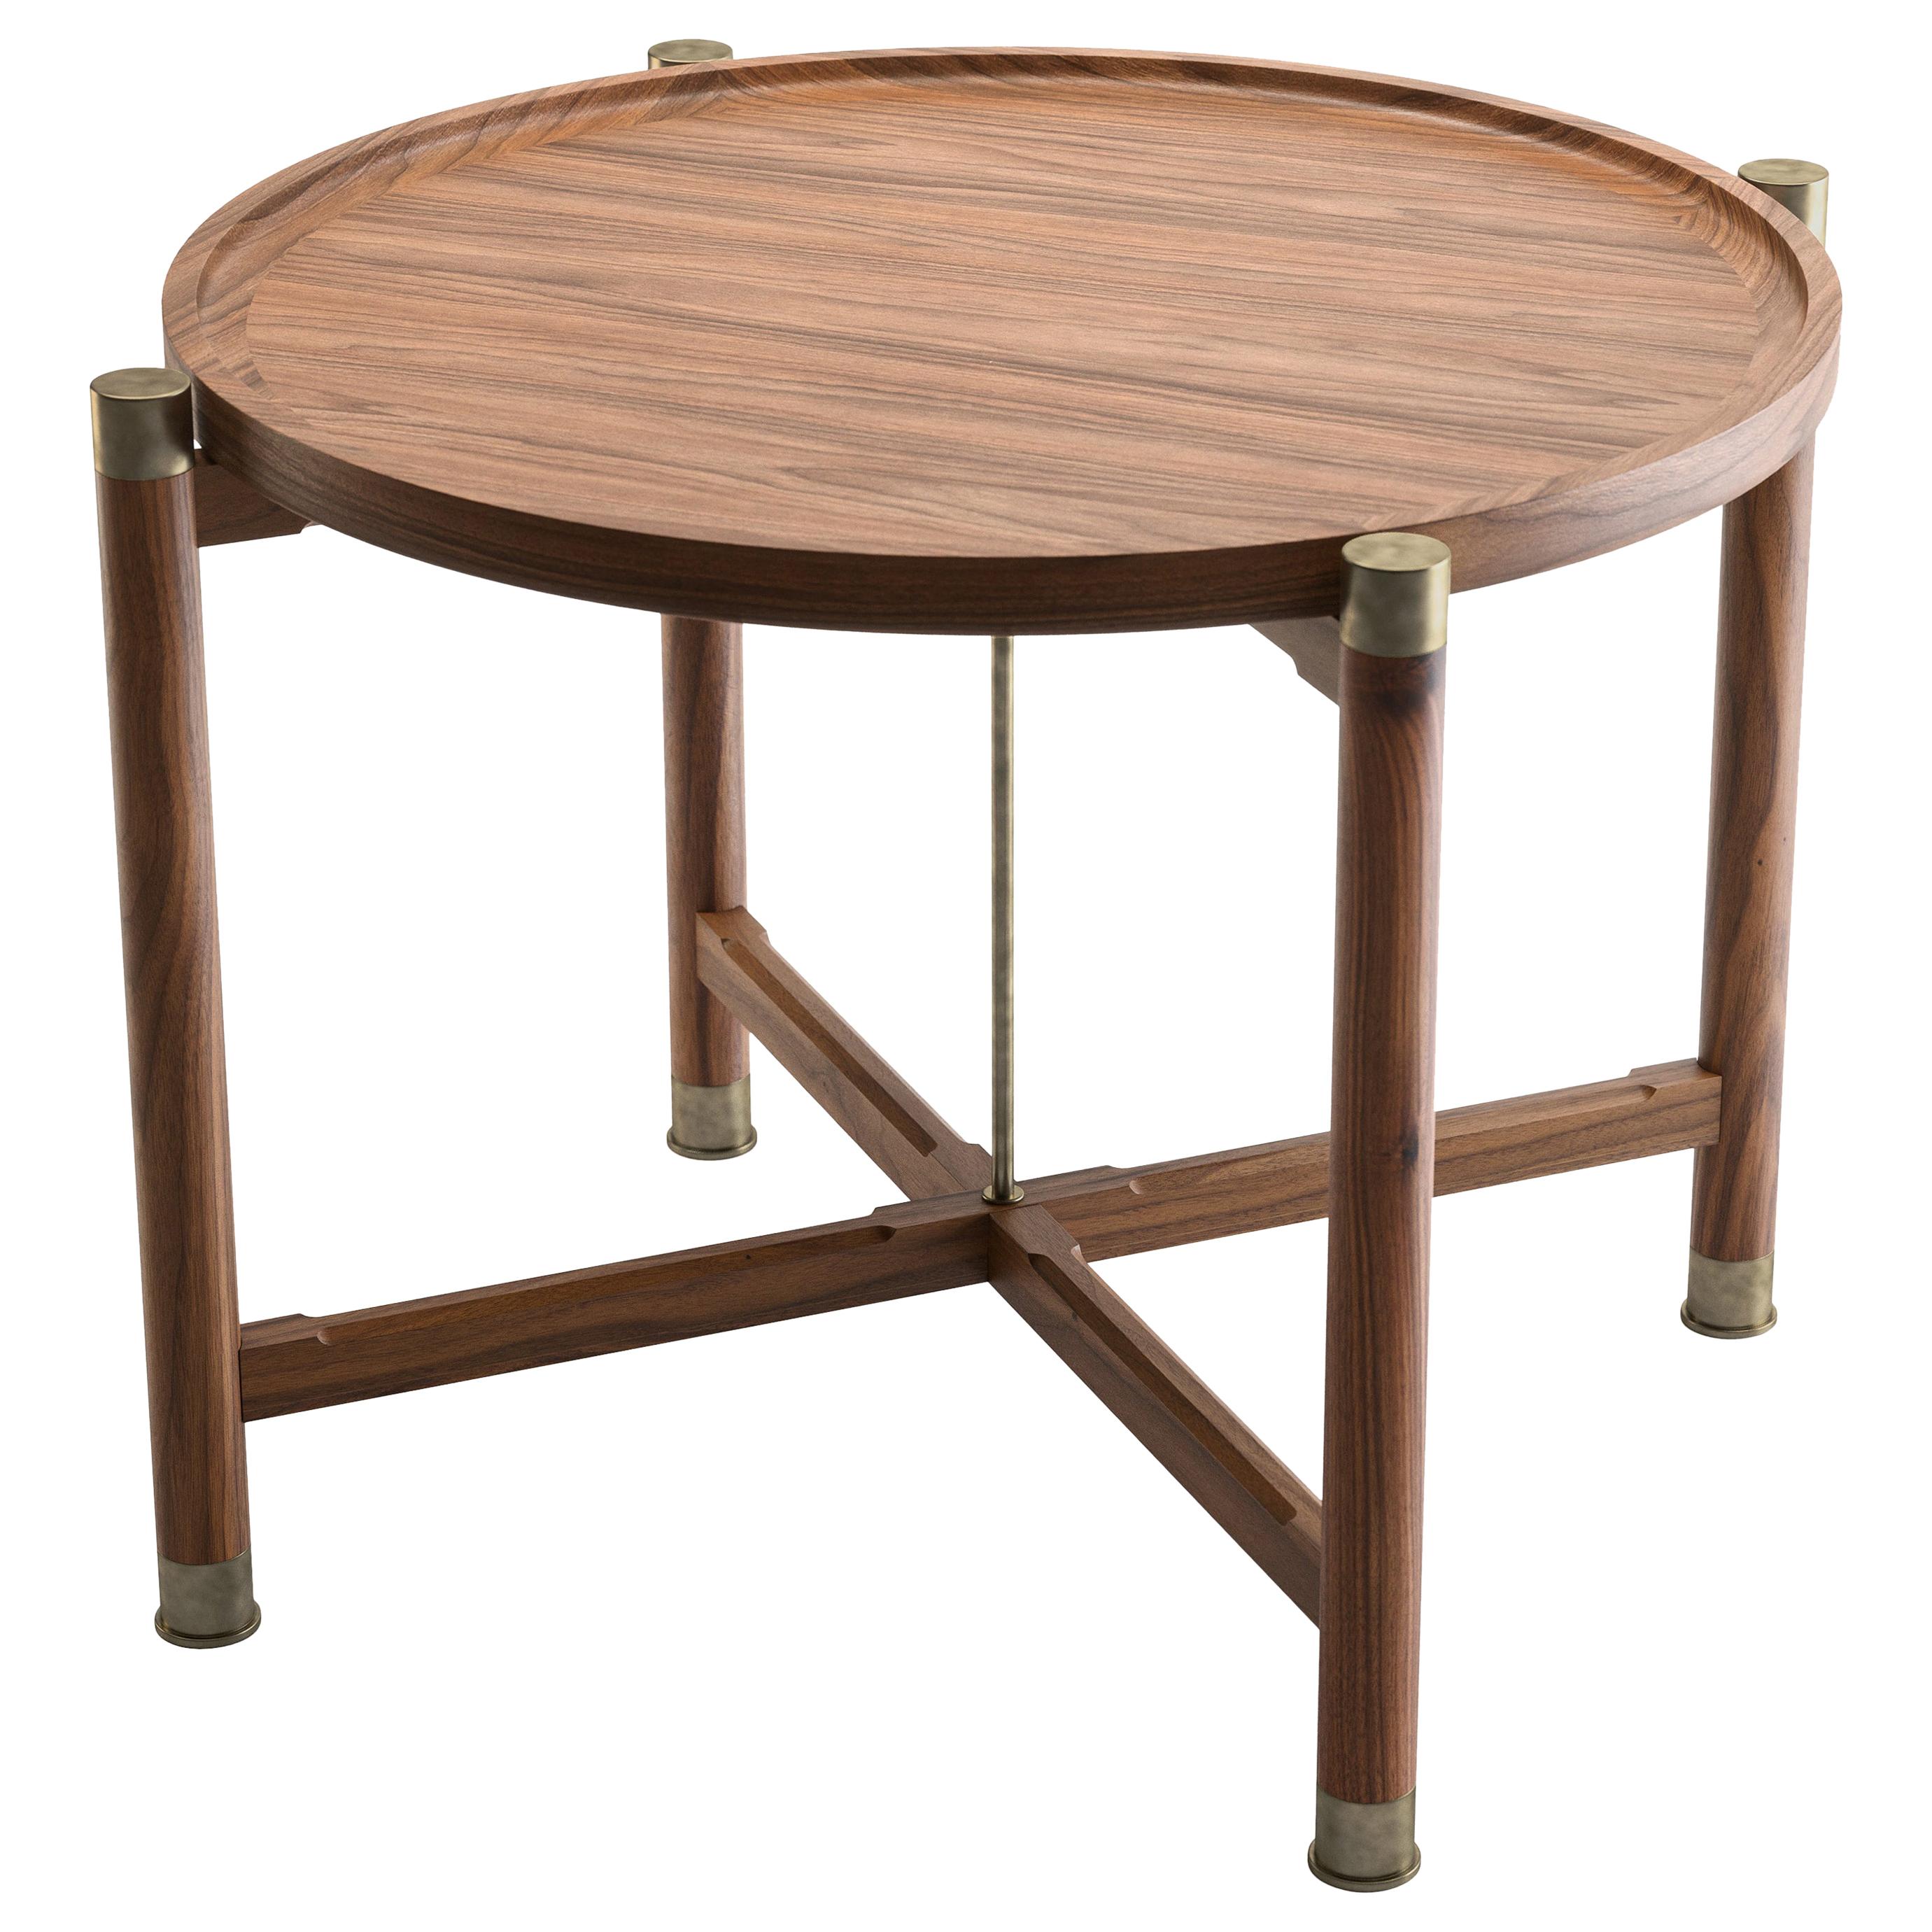 Otto Round Side Table in Light Walnut with Antique Brass Fittings and Stem For Sale